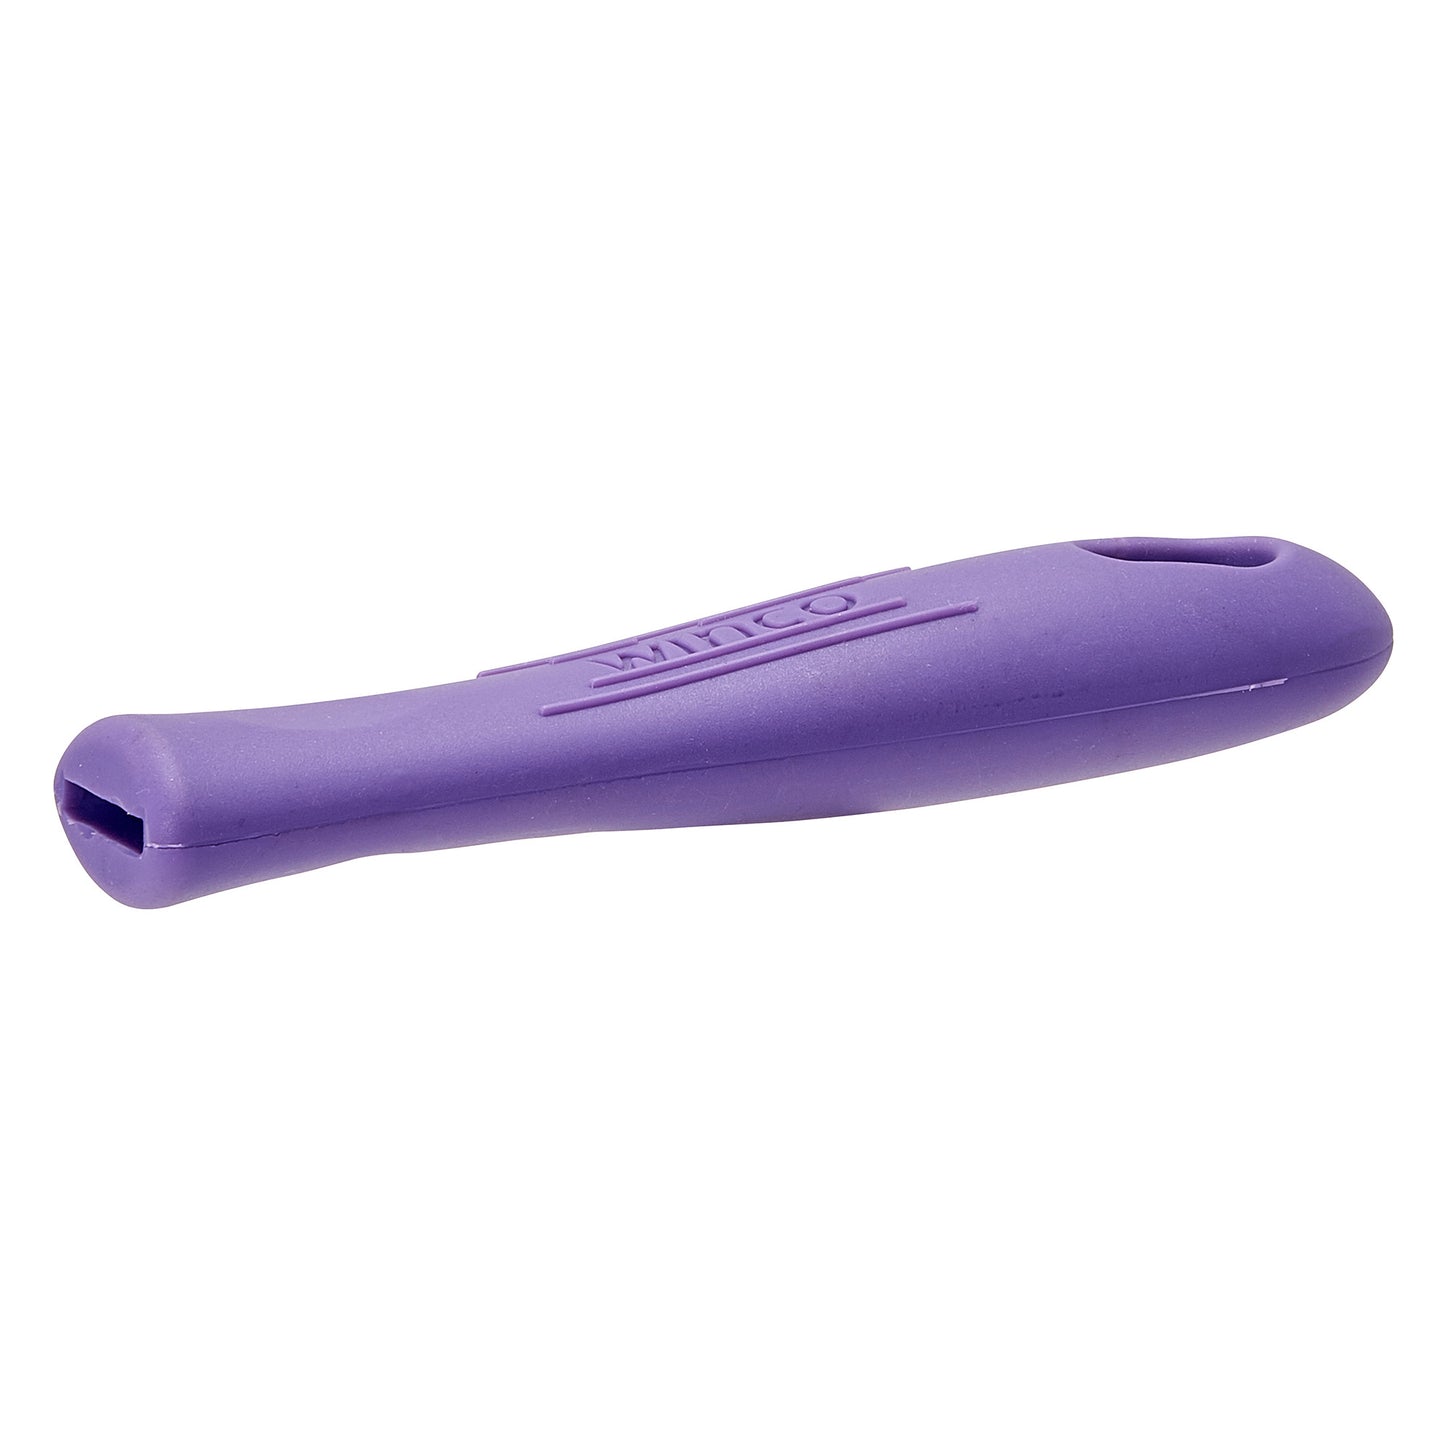 AFP-10HP - Removable Silicone Sleeve for Fry & Sauce Pans - Purple Allergen-Free, Fits AFP-10, ASFP-11, ASP-3, -4